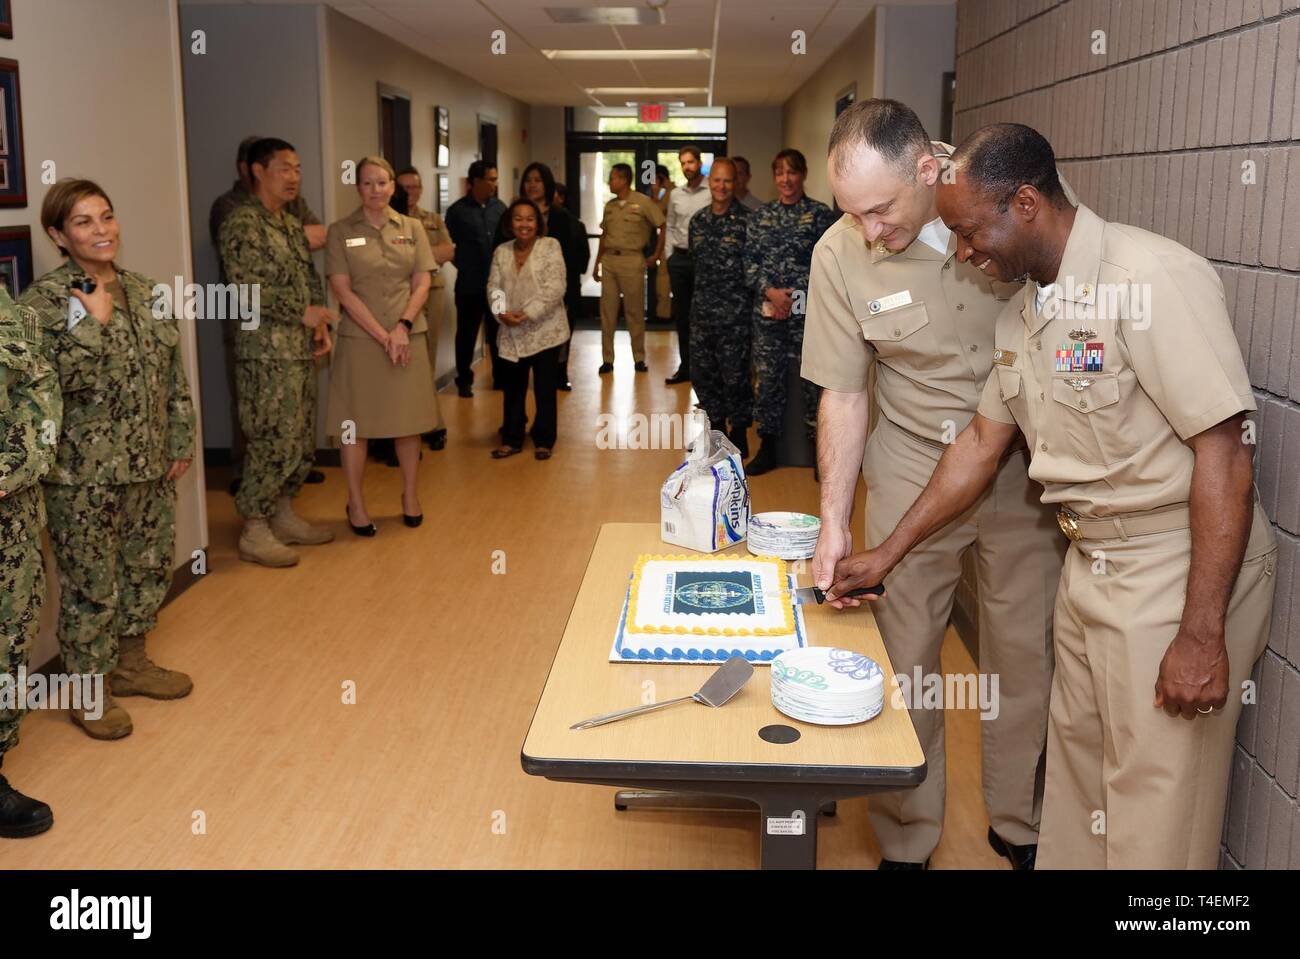 Navy Medicine West (NMW) Command Master Chief Loren Rucker and Chief Hospital Corpsman Noghayin Idele cut the birthday cake for the Chief Petty Officer’s 126th birthday during an all hands call at regional headquarters onboard Naval Base San Diego. NMW provides medical care to nearly 700,000 beneficiaries throughout the West Coast of the U.S., Asia, and the Pacific. Globally, NMW oversees eight research laboratories across the U.S. and overseas that deliver research expertise in support of warfighter health and readiness. Stock Photo